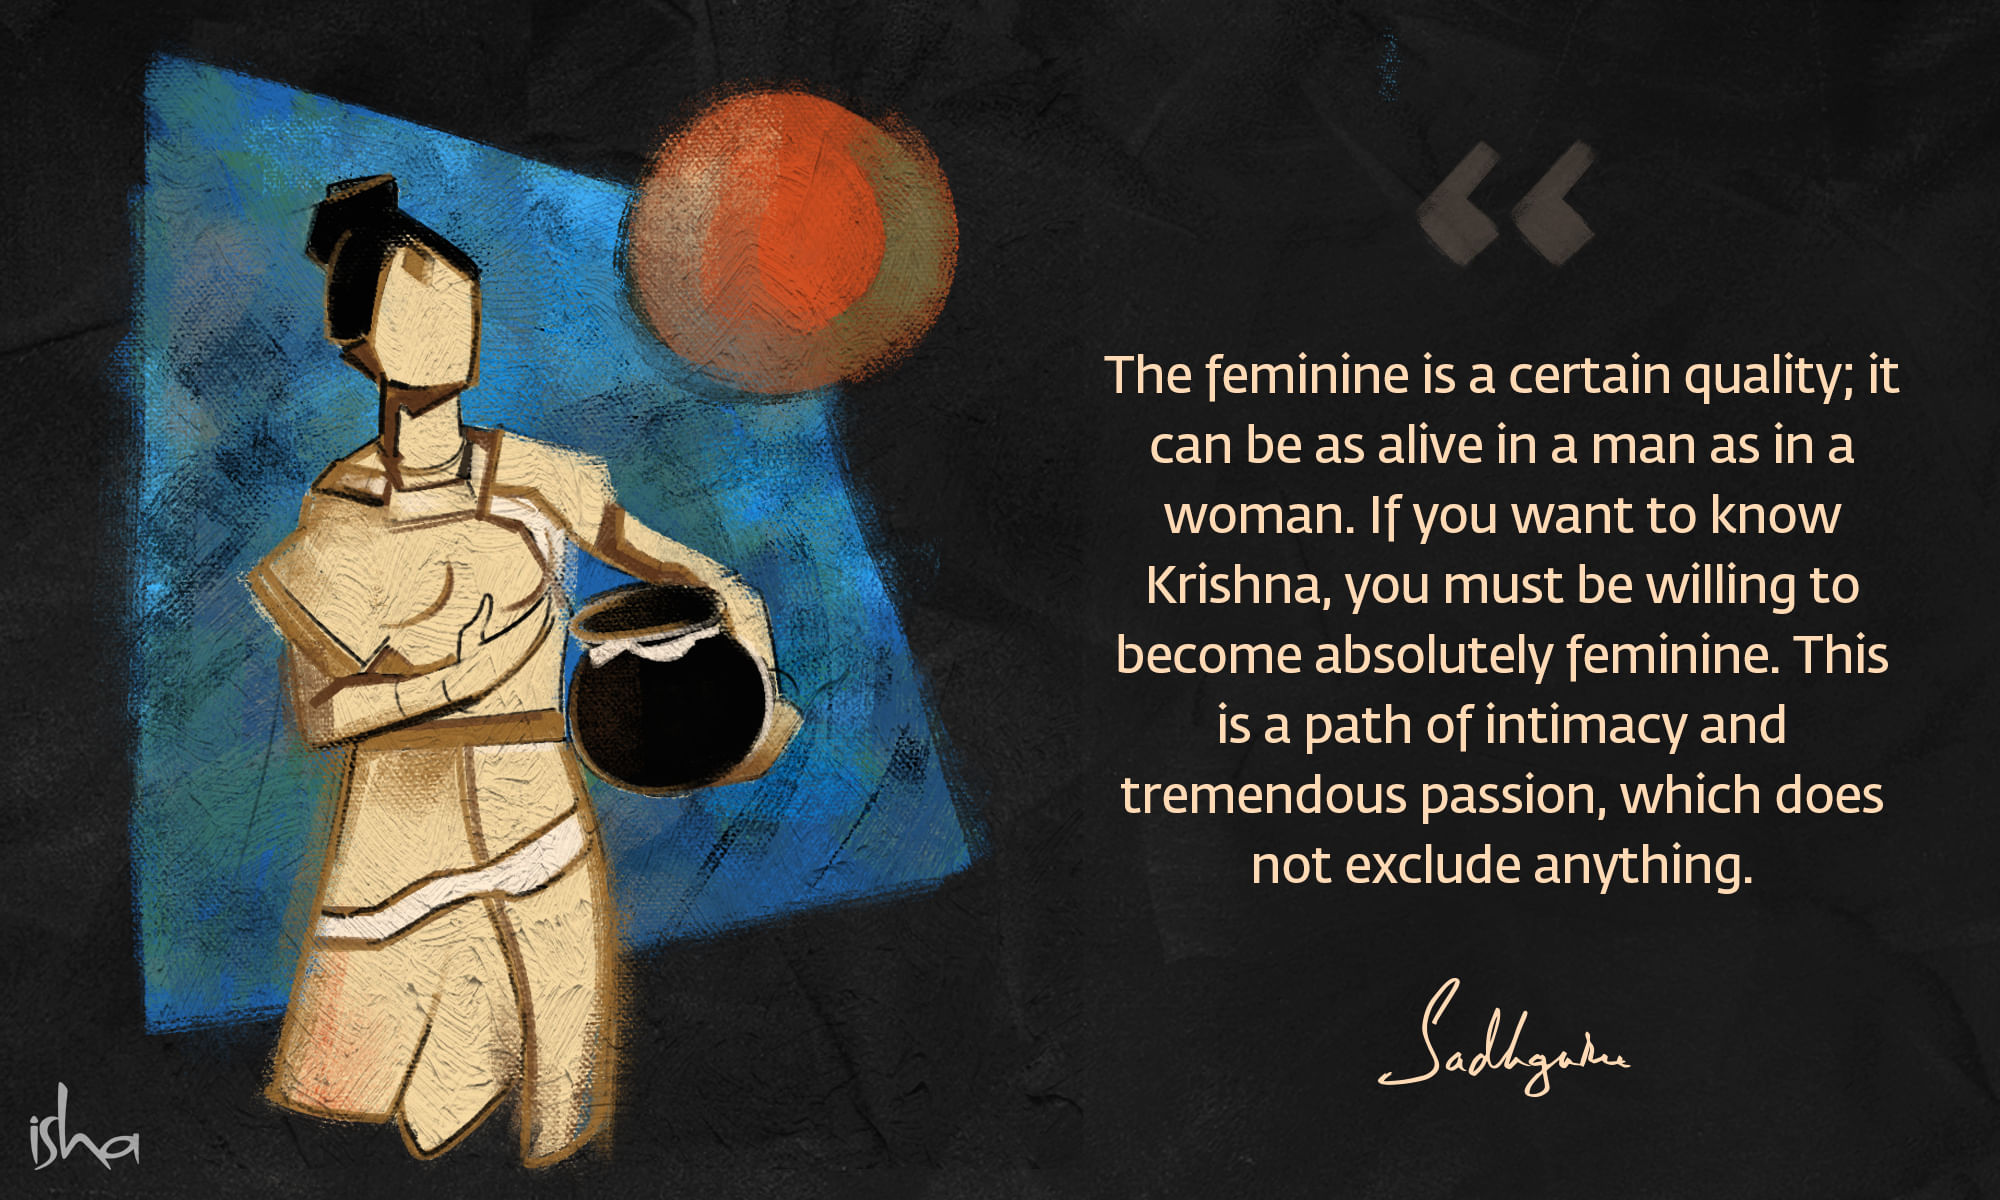 Krishna quote from Sadhguru with abstract woman holding a pot.